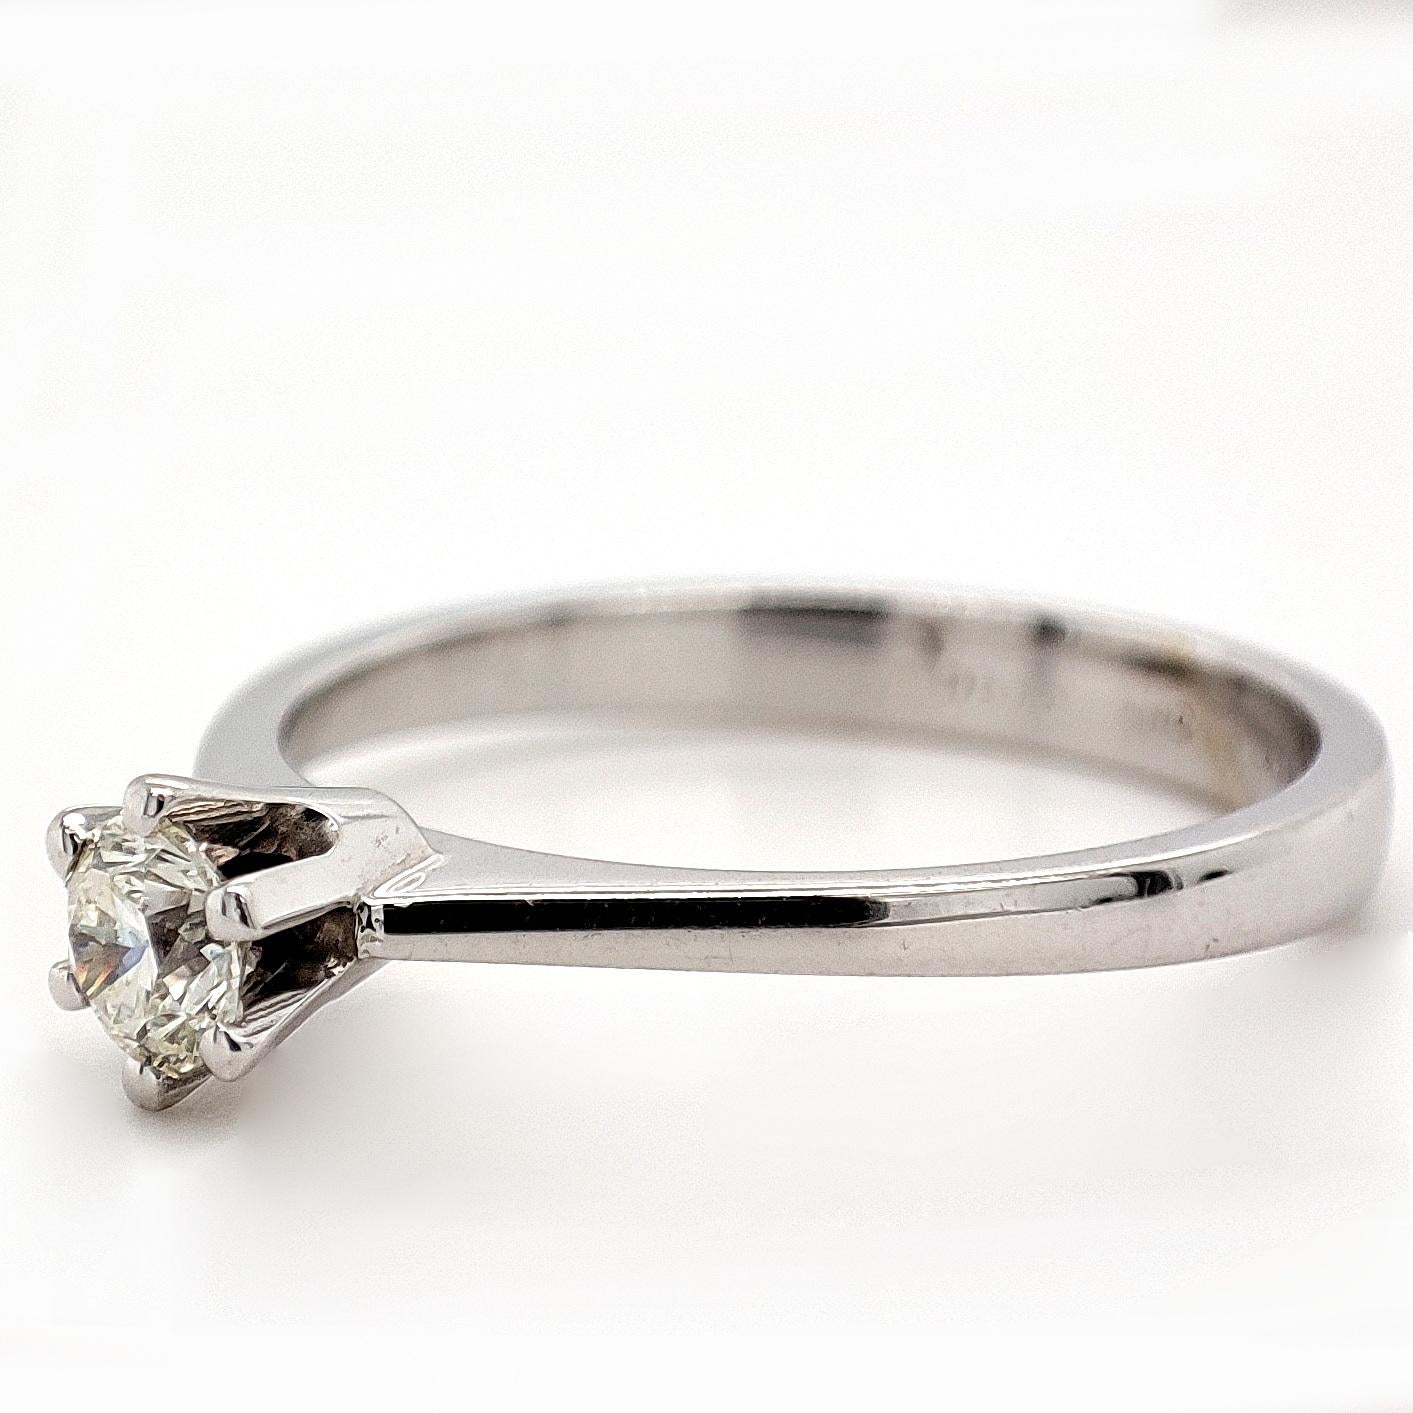 FOR US CUSTOMER NO VAT!

Cherish the moment with this stunning 0.25CT J, VS1 Solitaire Engagement Diamond Ring. Set in luxurious 14K White Gold, this exquisite ring weighs 2.18 grams and is designed in size 6.25 with resizable flexibility. Make a